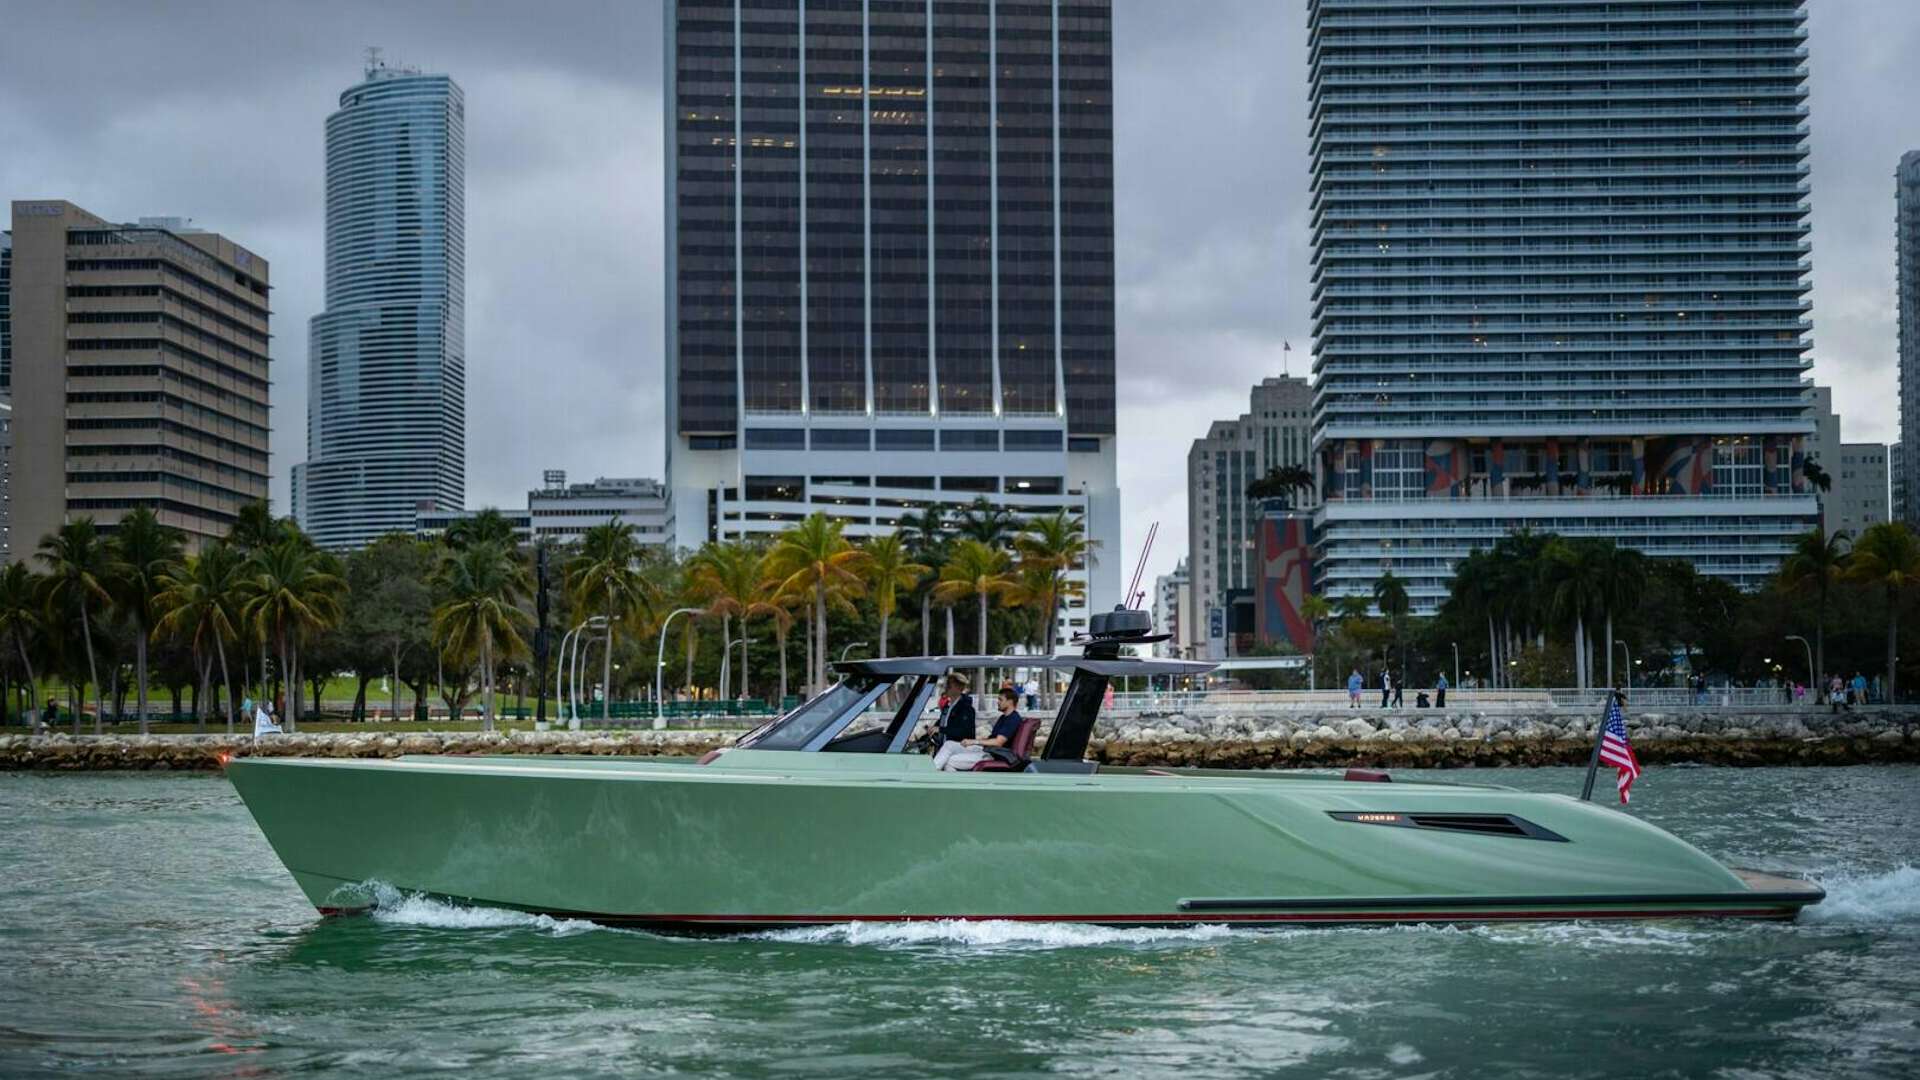 Another one
Yacht for Sale